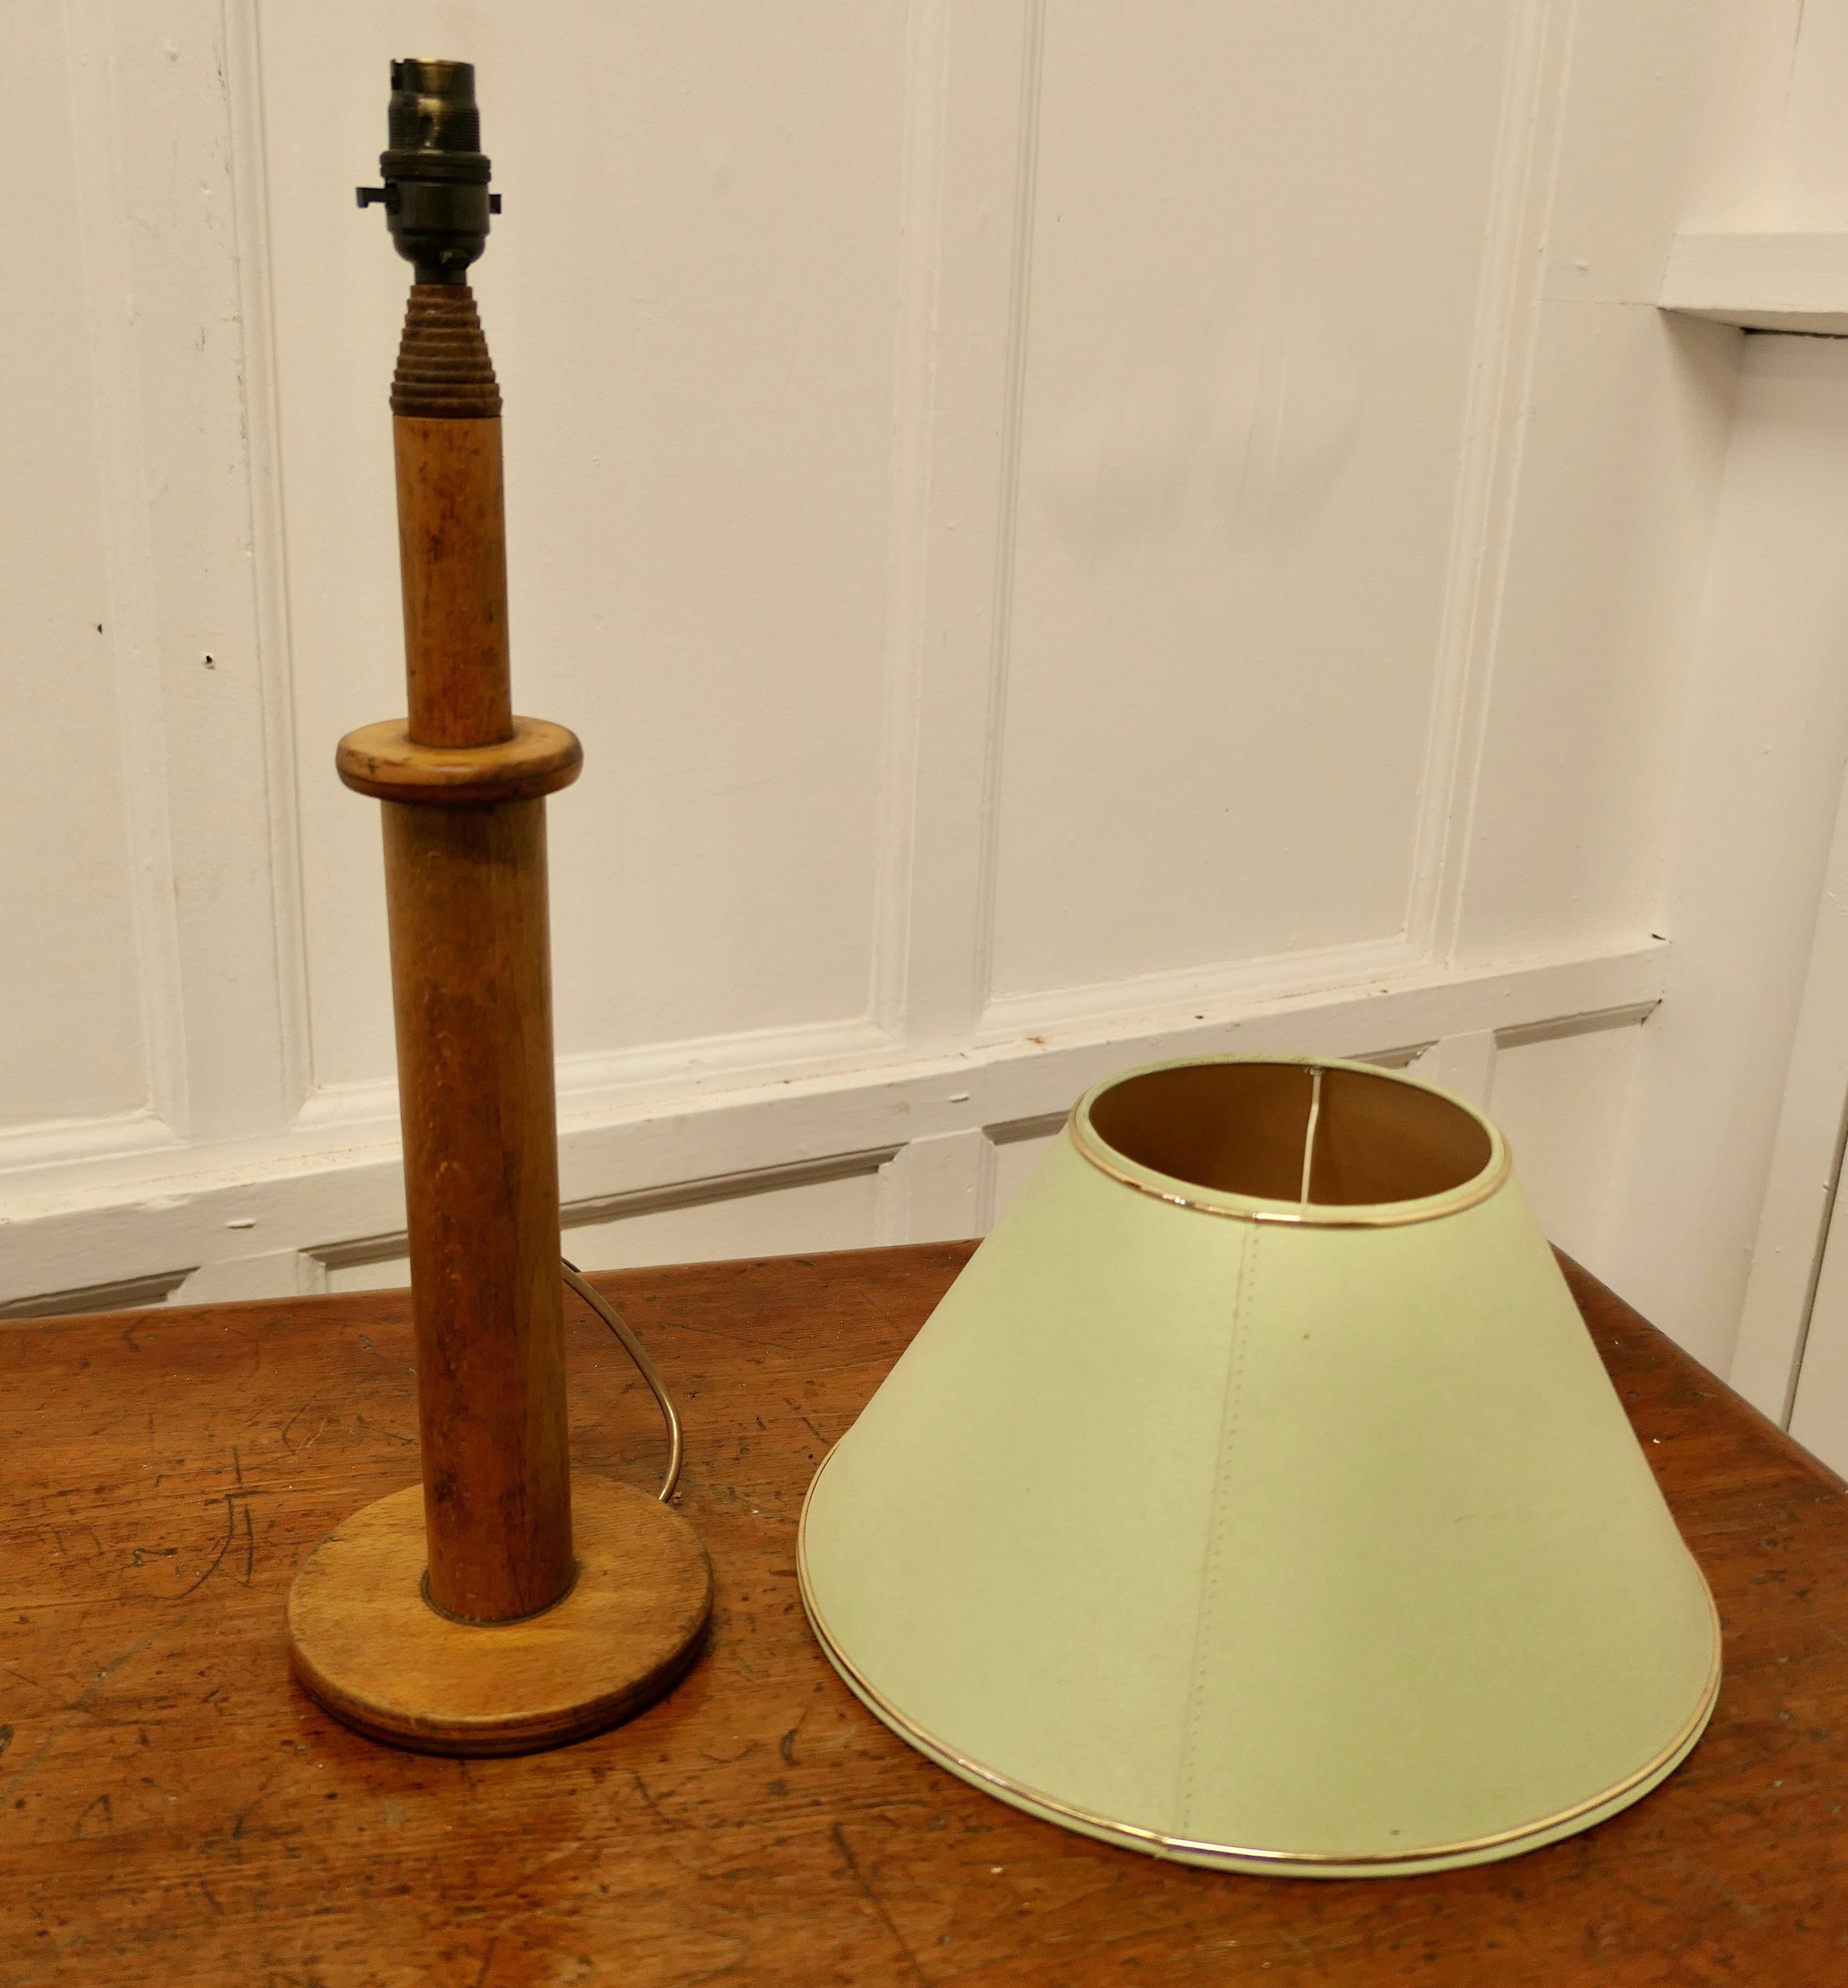 Rustic Table Lamp Made From a Wool Bobbin

A good attractive if rustic table lamp made in beech from a mill bobbin, tall and sturdy and it comes with pale green linen covered shade
The Lamp is 26” high, 6” diameter made the shade is 14” in